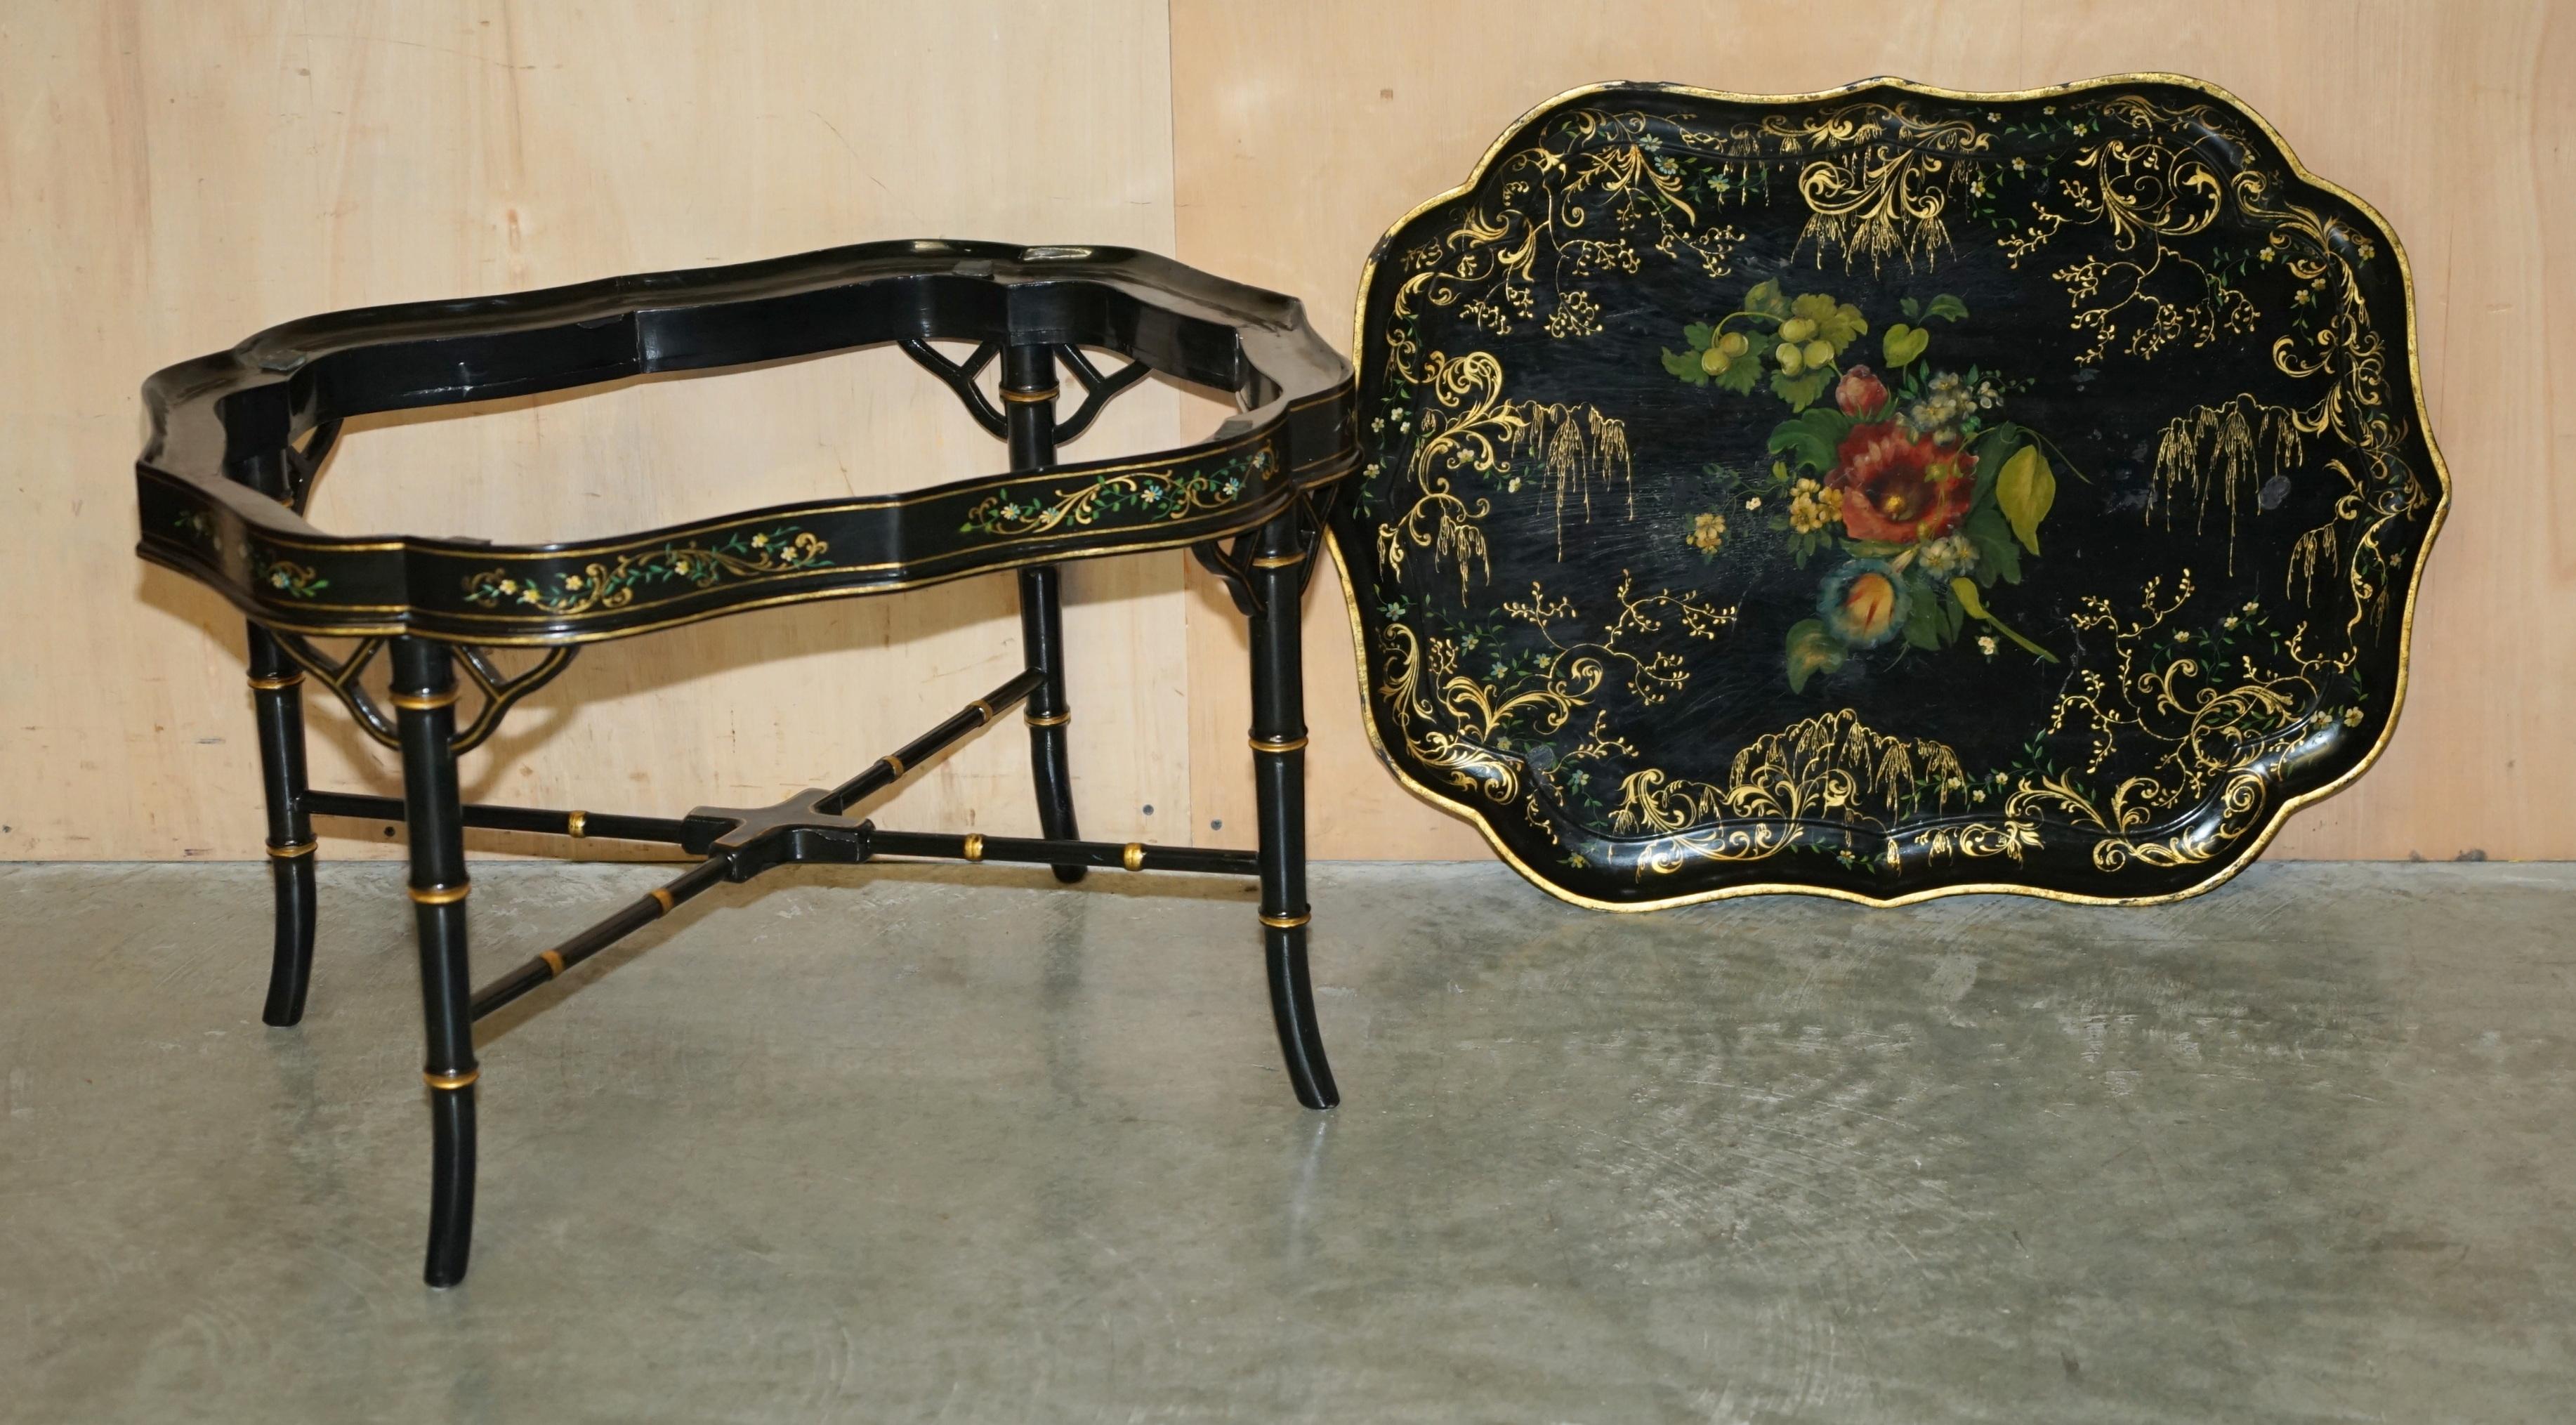 Royal House Antiques

Royal House Antiques is delighted to offer for sale this very decorative antique circa 1810-1820 Regency Paper Mache hand painted tray table in the Chinese Chinoiserie taste

Please note the delivery fee listed is just a guide,